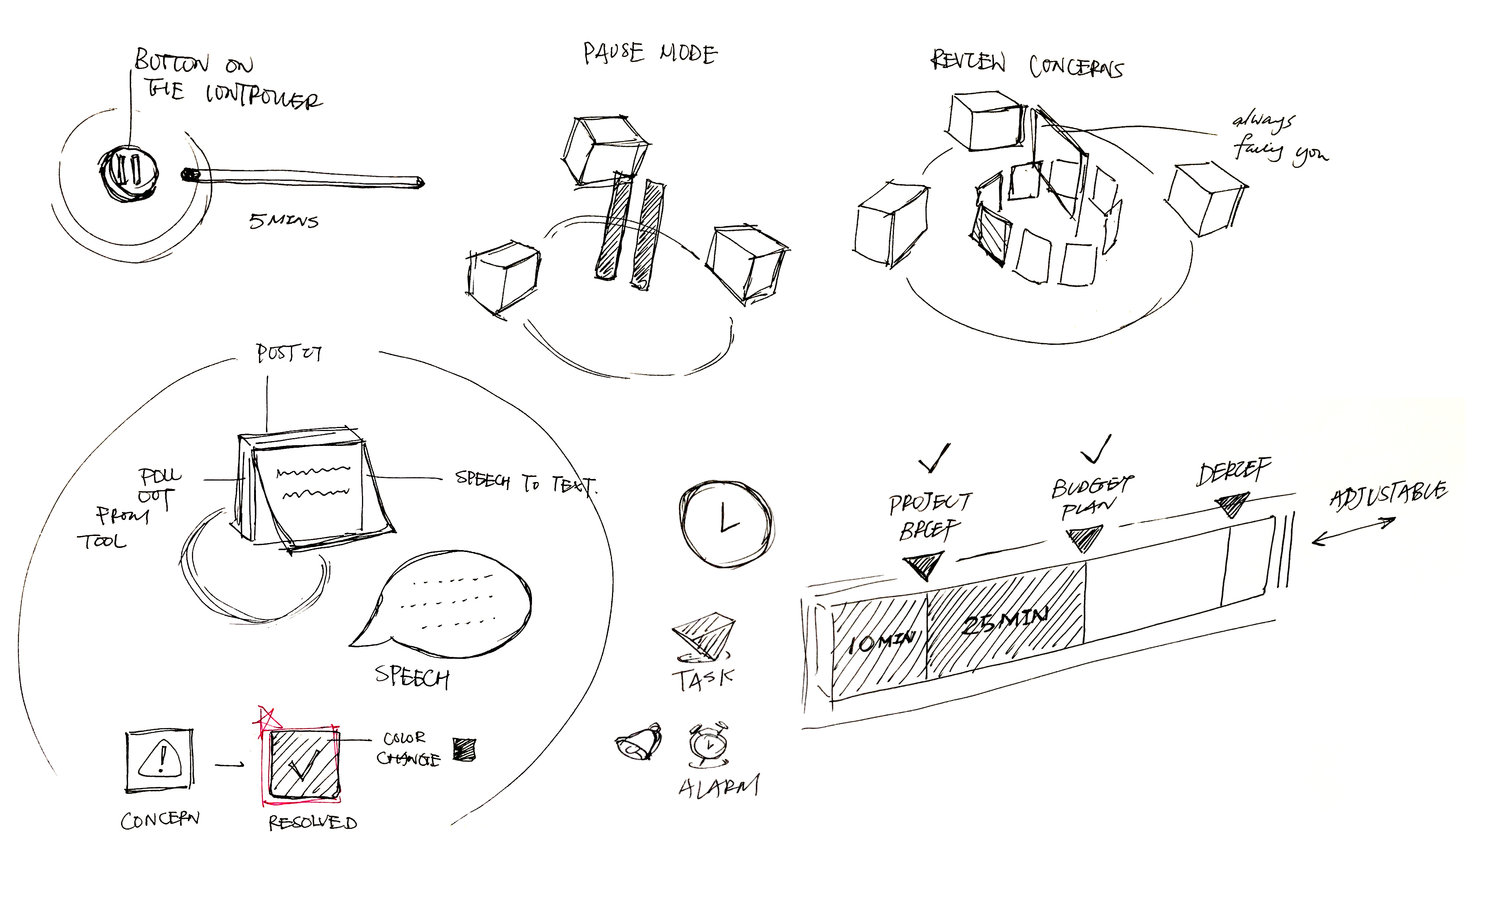 Janel's sketches exploring VR interactions